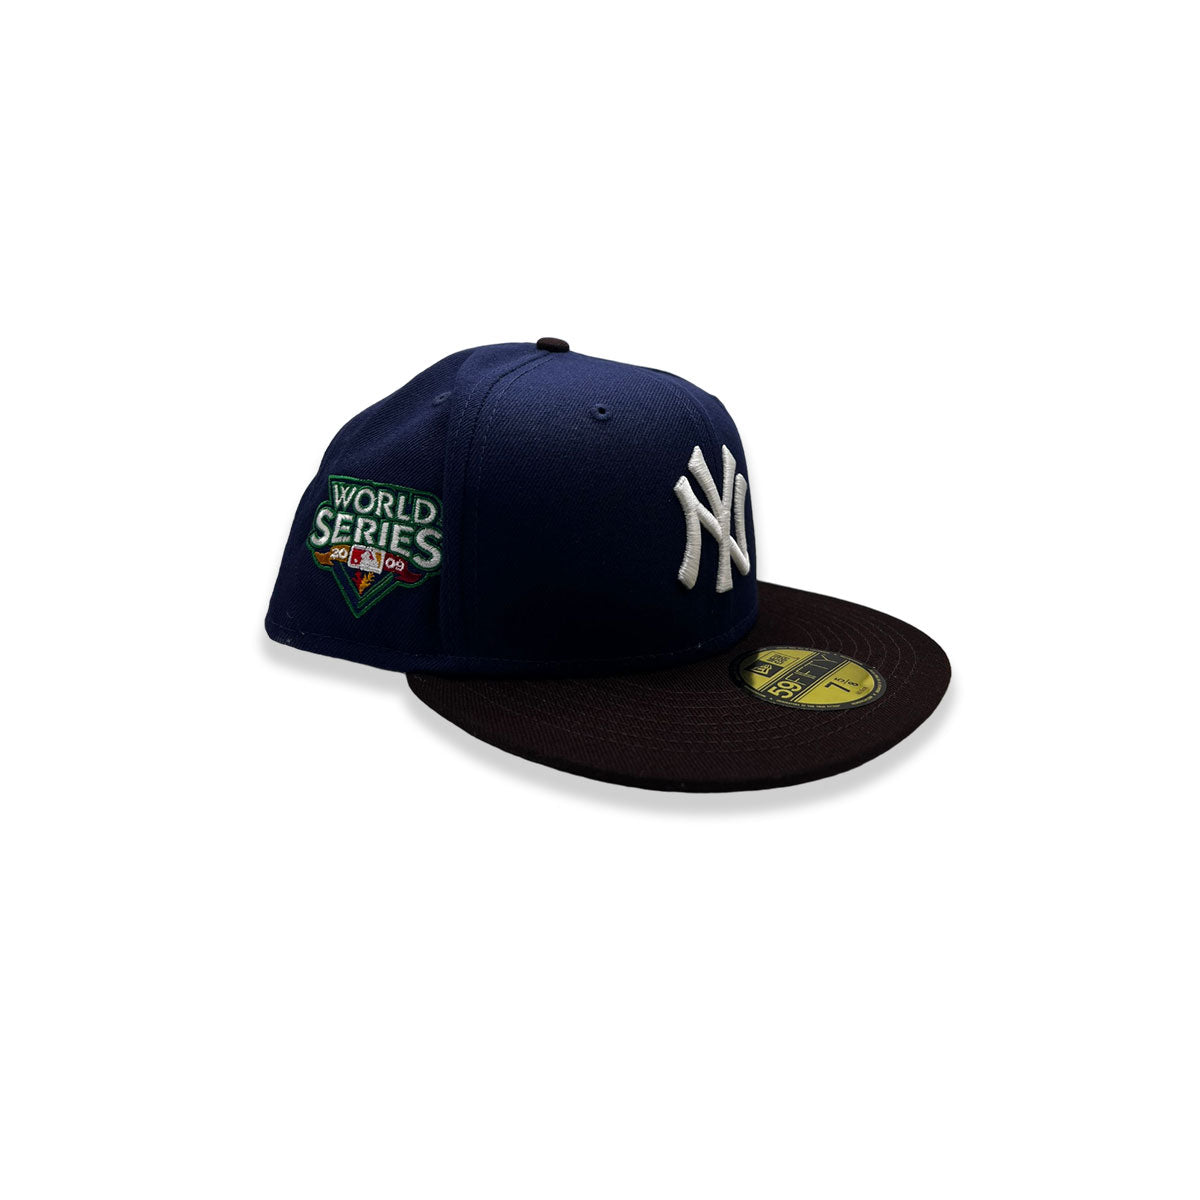 New Era NEw York Yankees World Series 2009 Patch 59Fifty Fitted